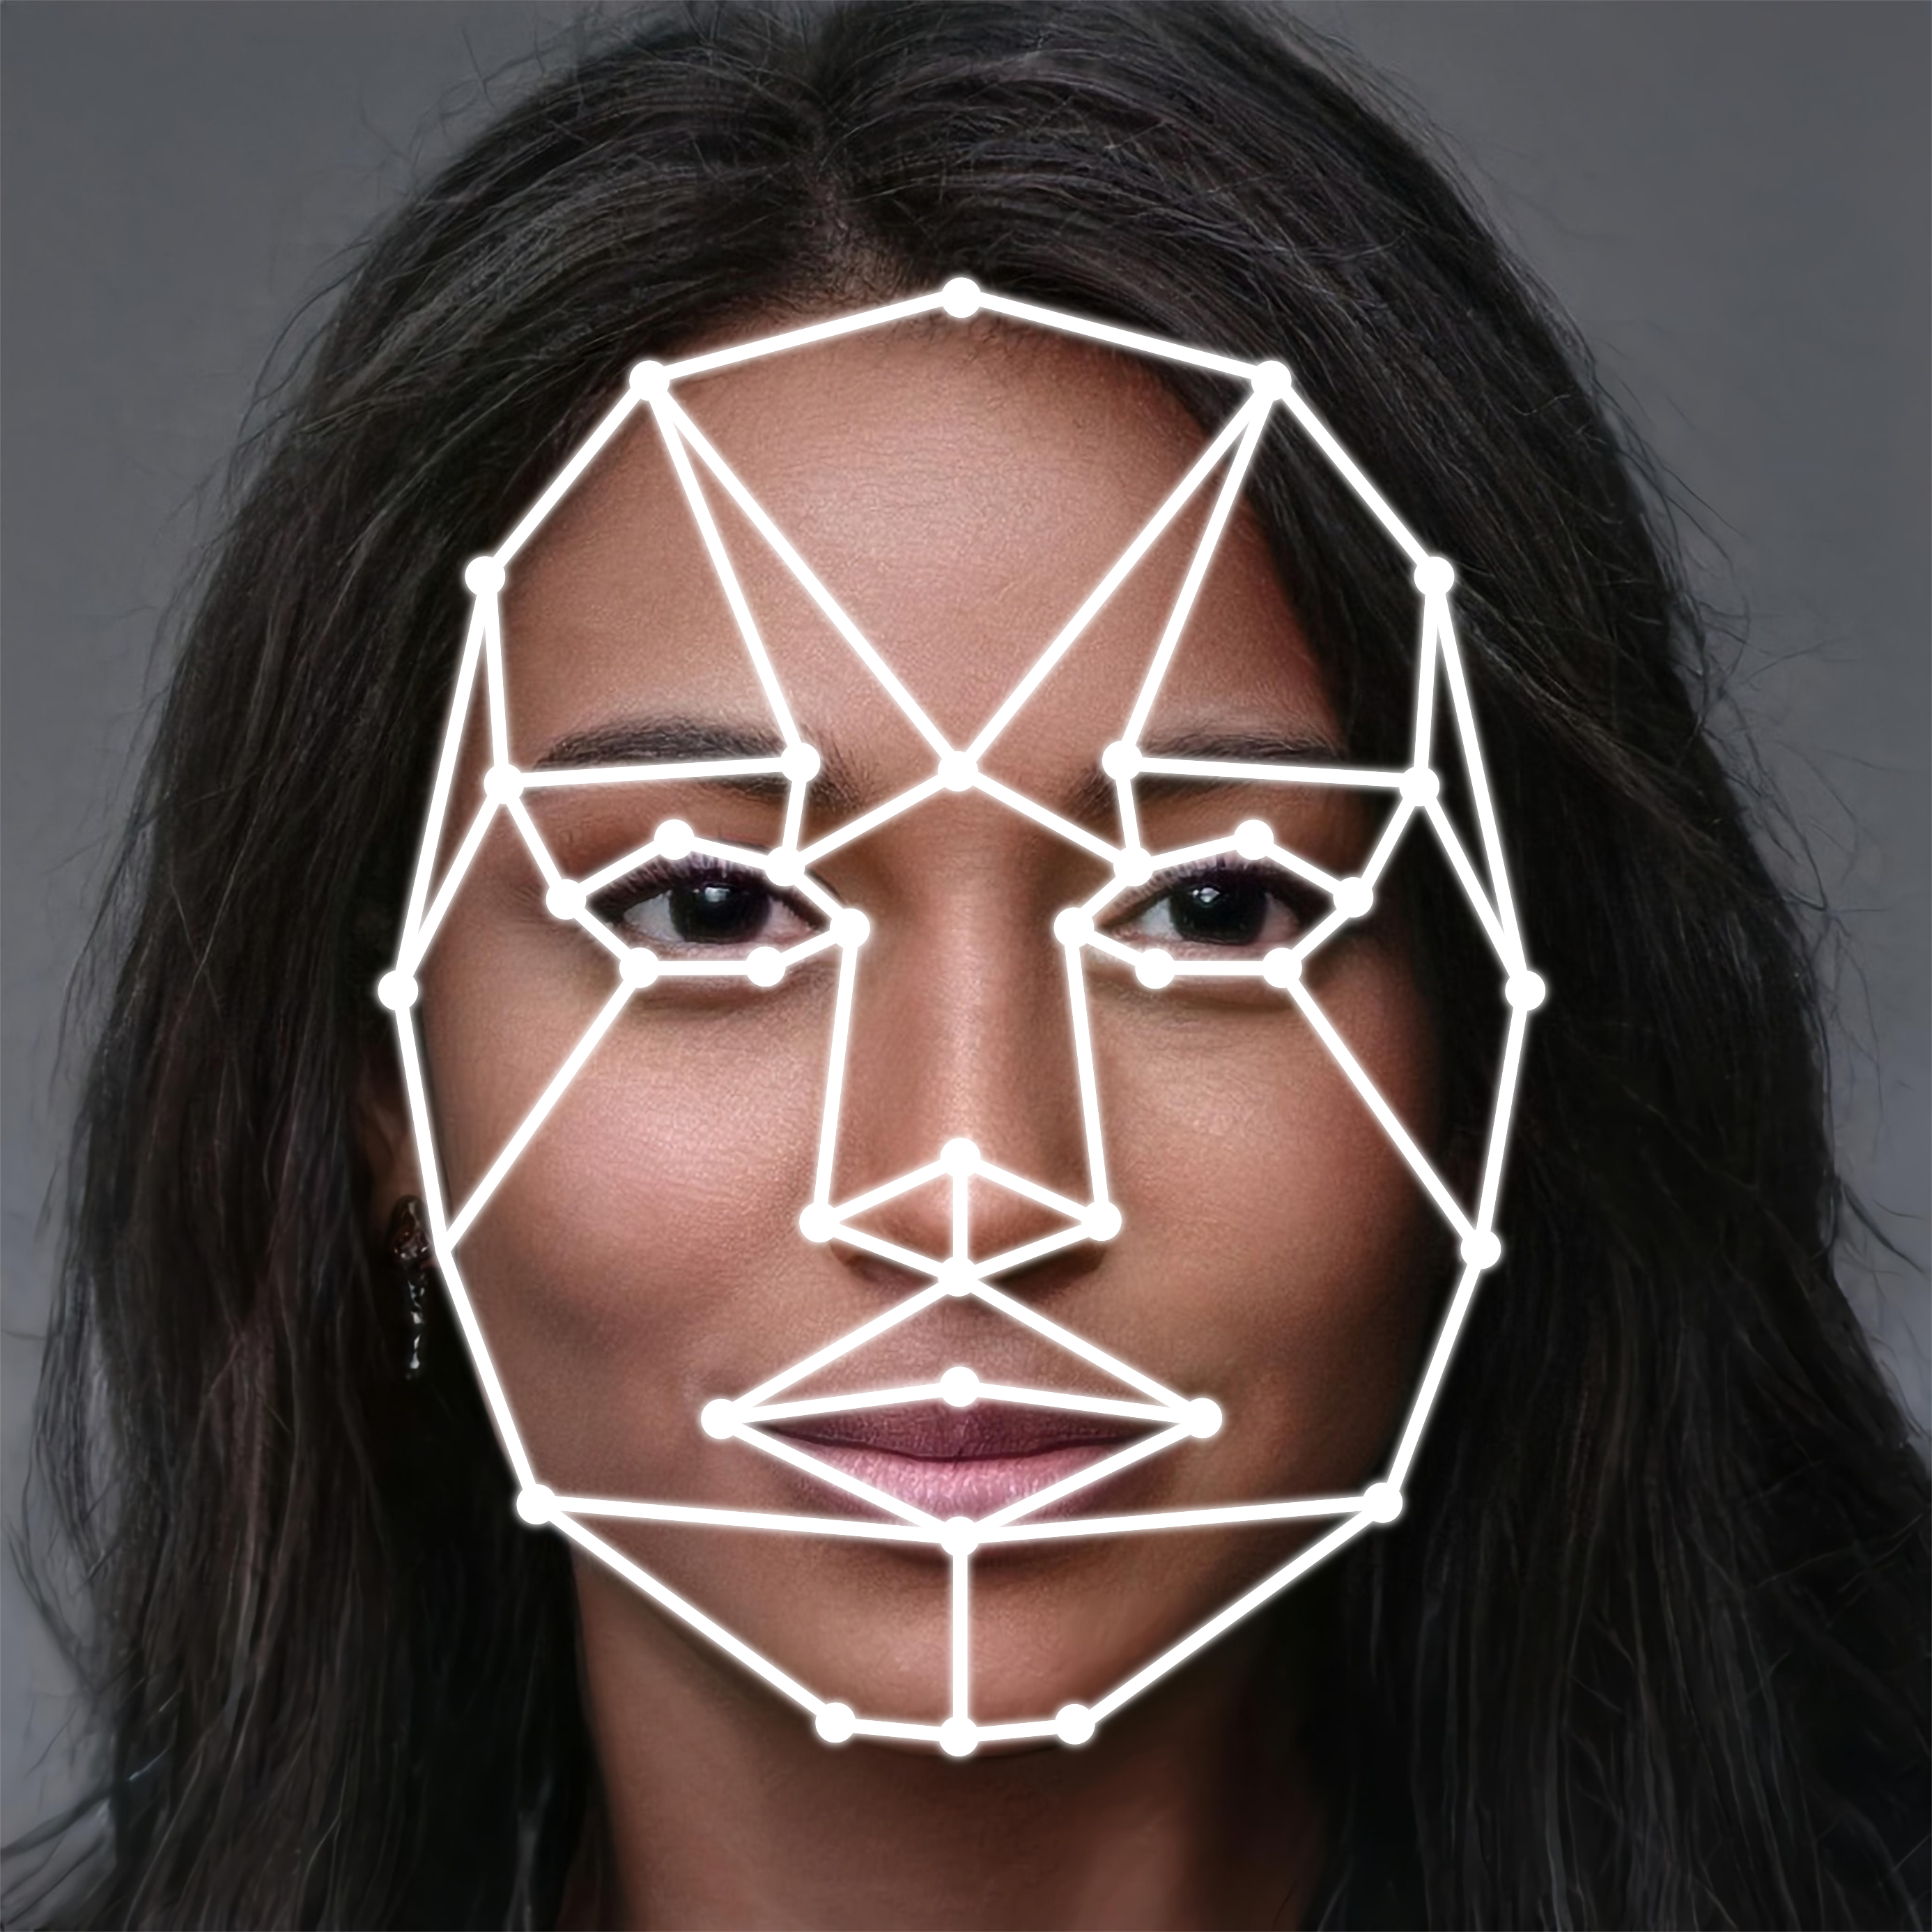 Woman's face with facial recognition